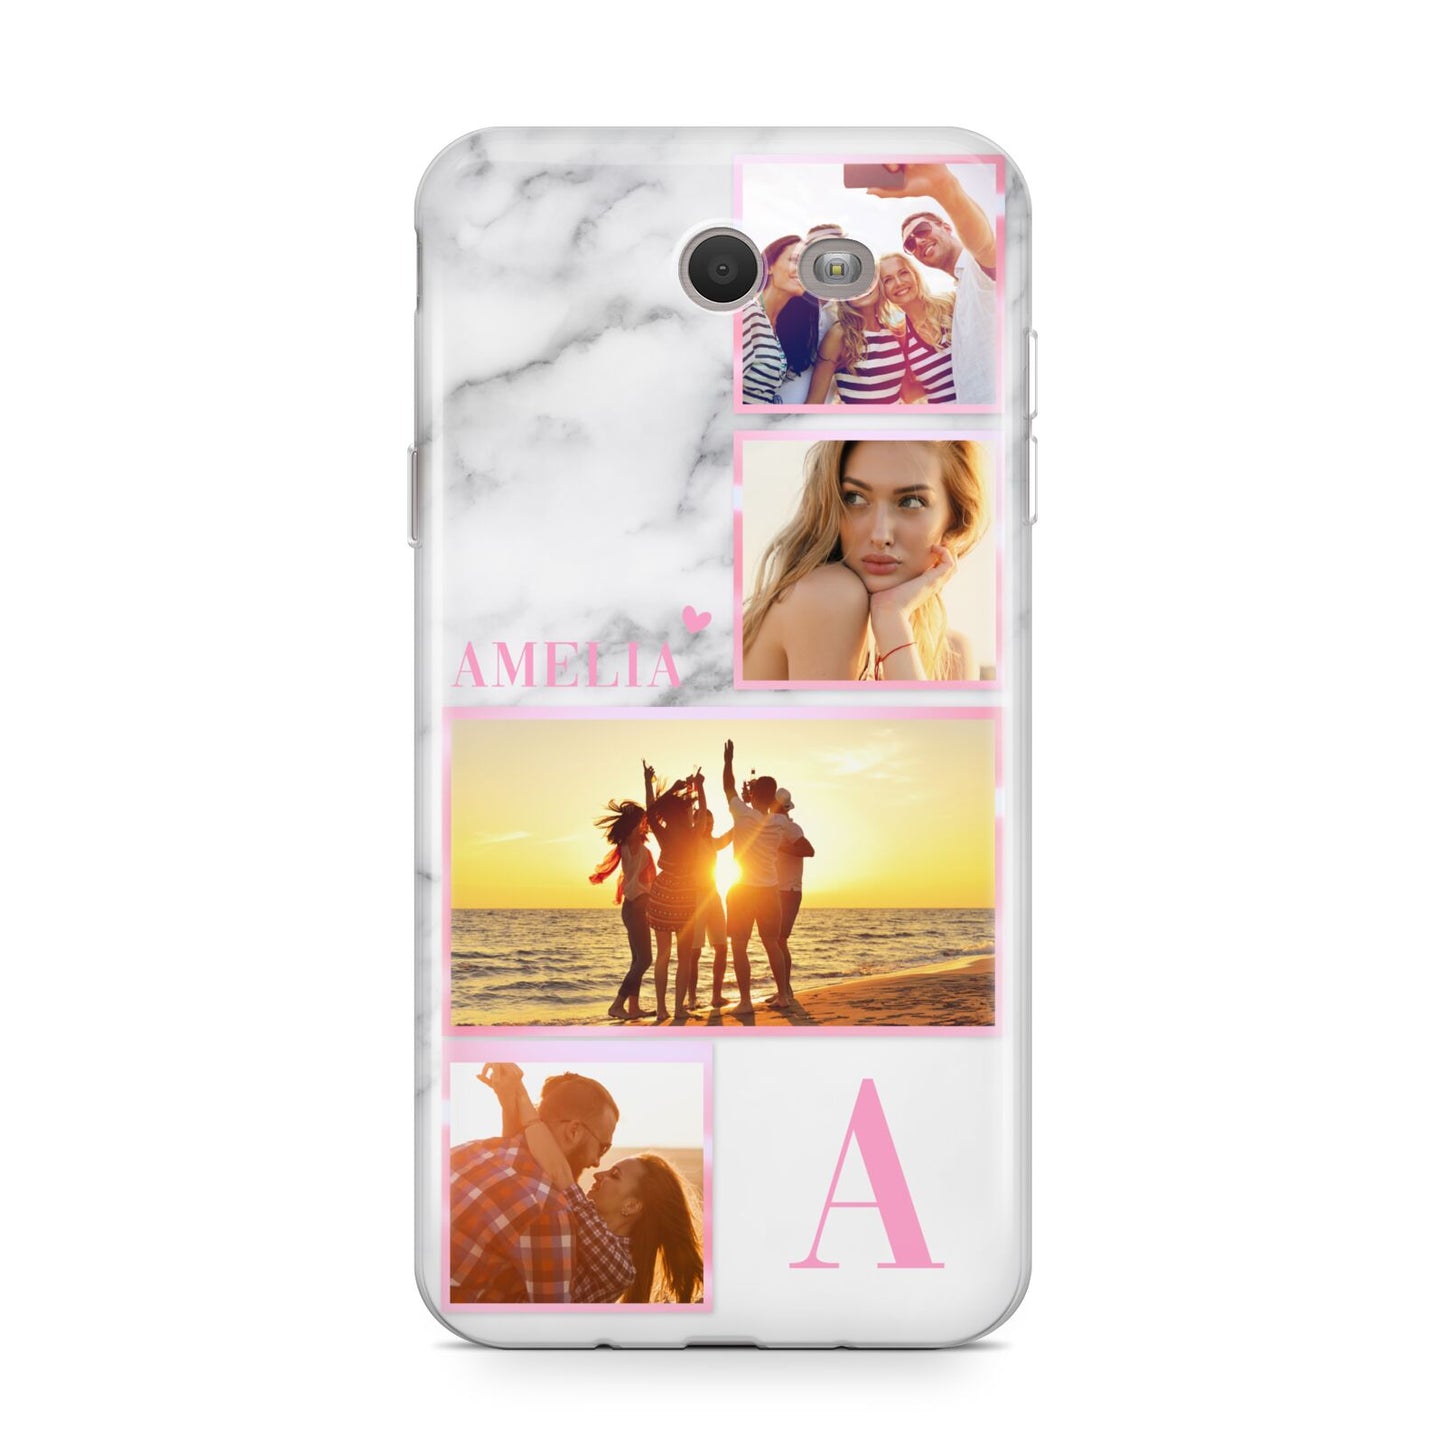 Personalised Marble Photo Collage Samsung Galaxy J7 2017 Case